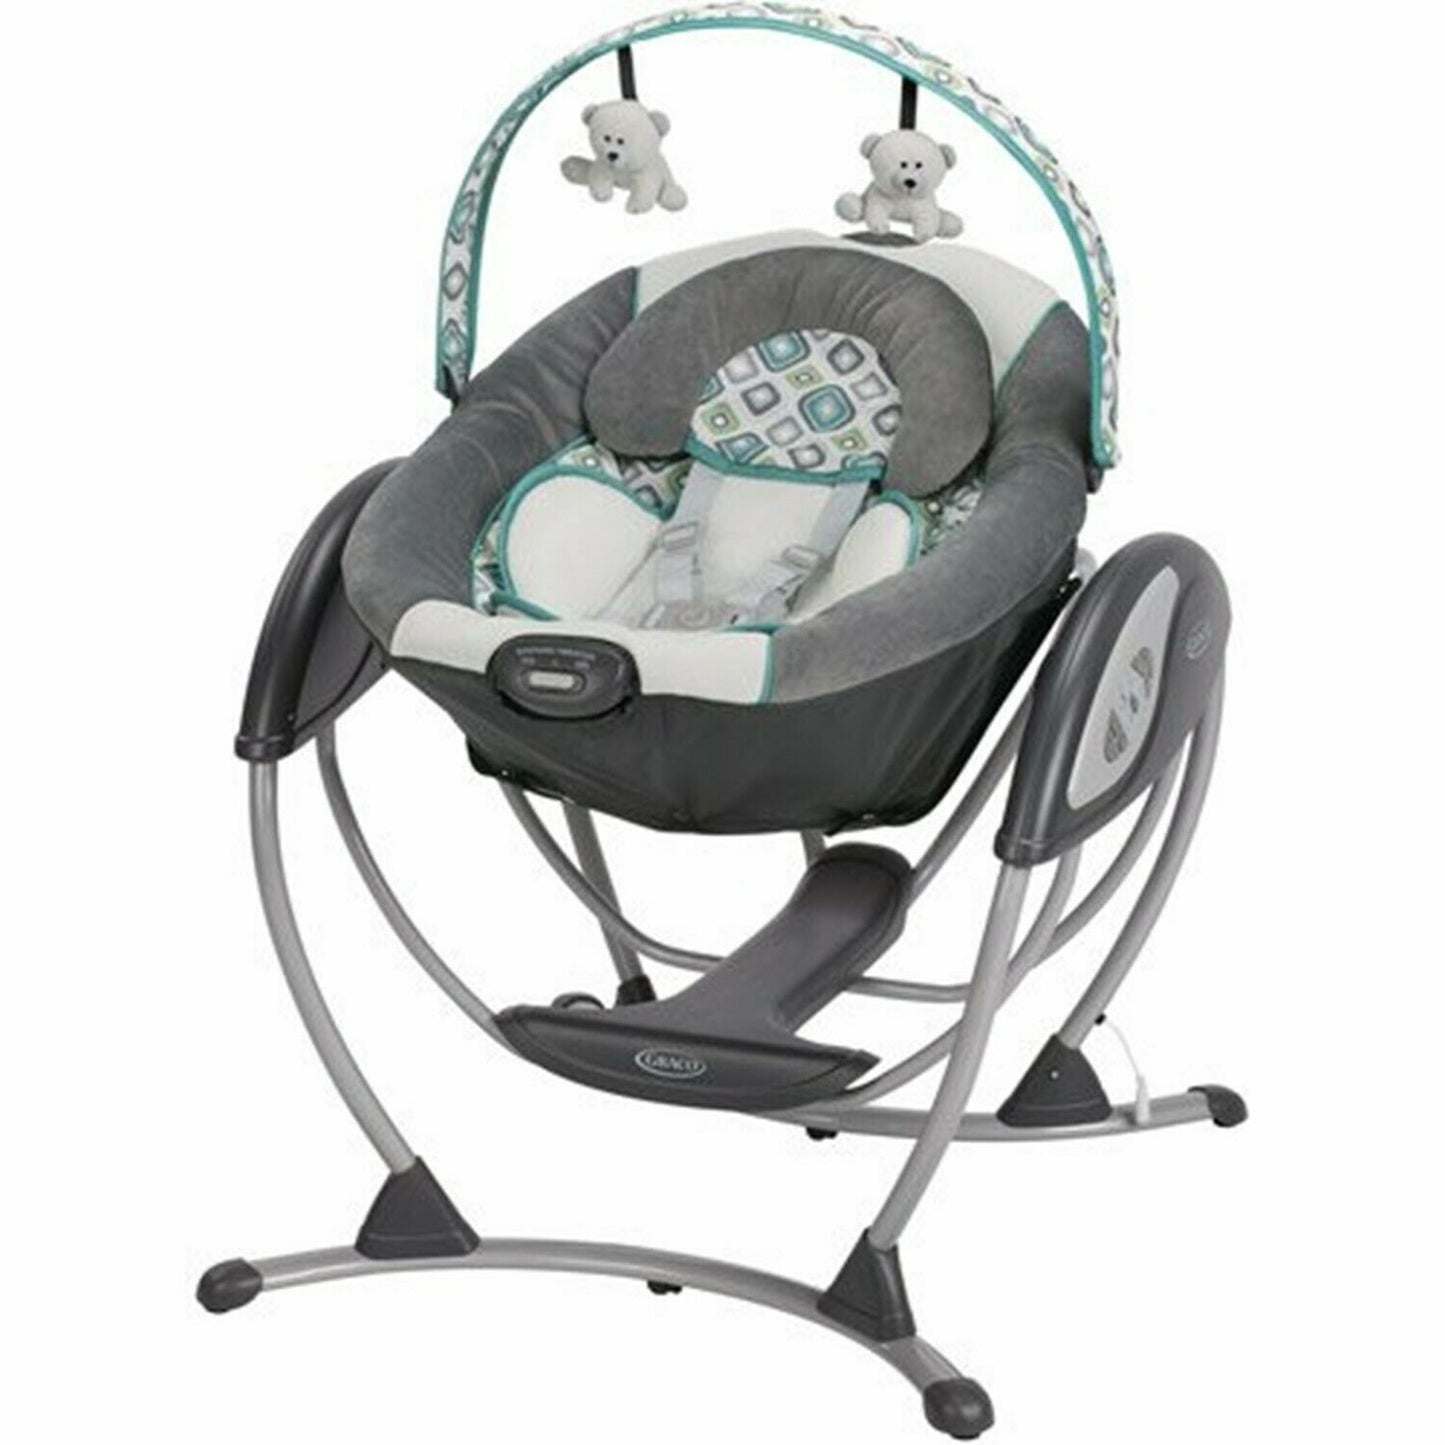 Combo Baby Stroller Travel System with Car Seat Playard Glider Swing High Chair